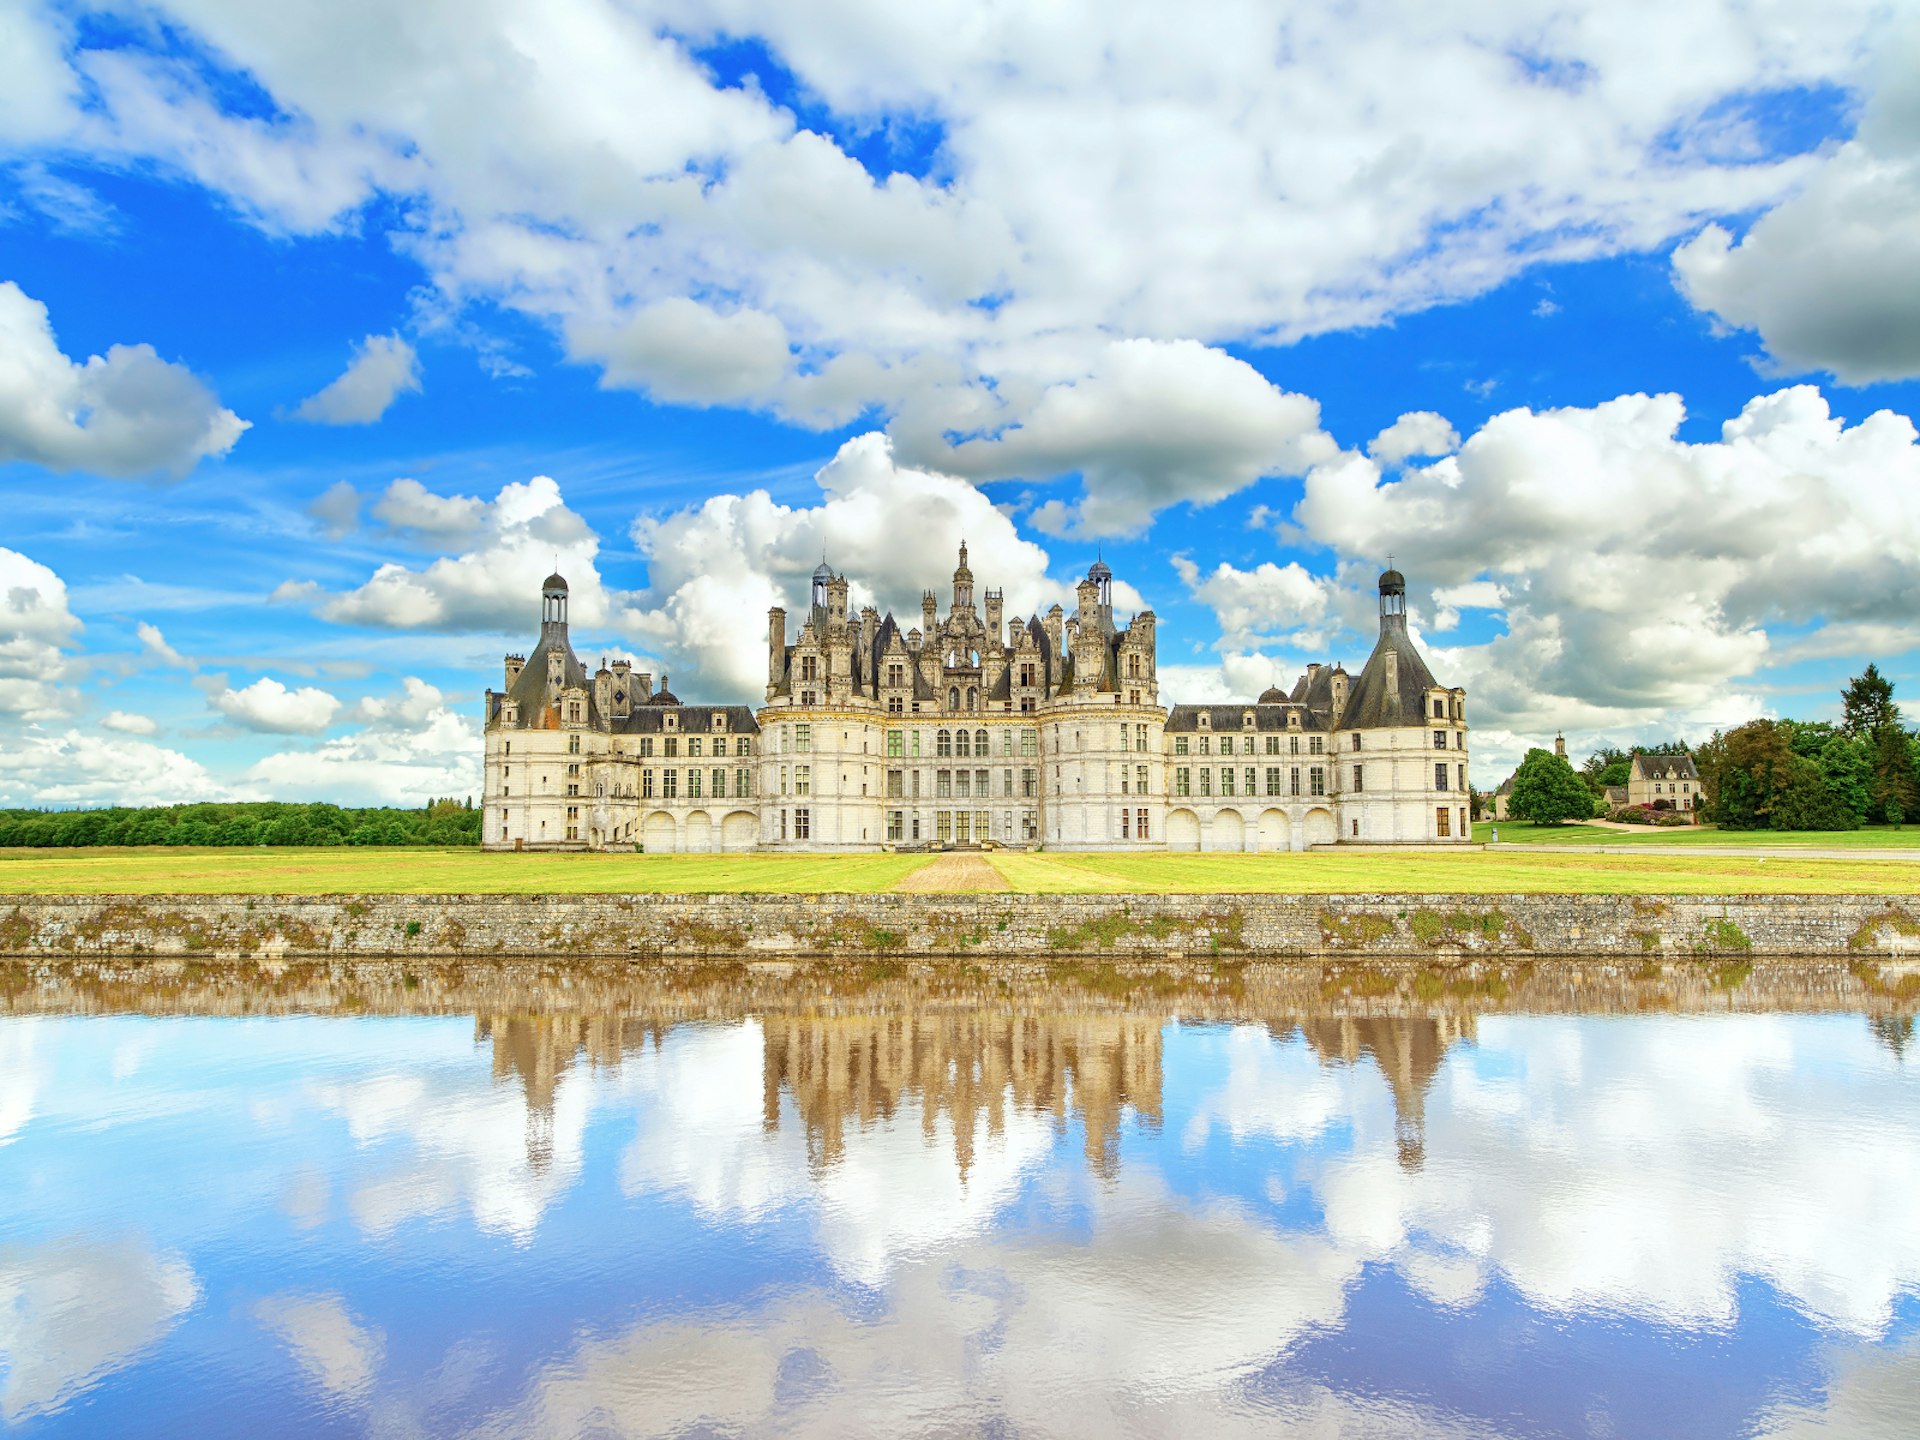 Chateau de Chambord, an impressive white-brick renaissance building with turrets and a grey slate roof. There is a large body of still water in front of the castle that perfectly mirrors the cloudy blue sky above